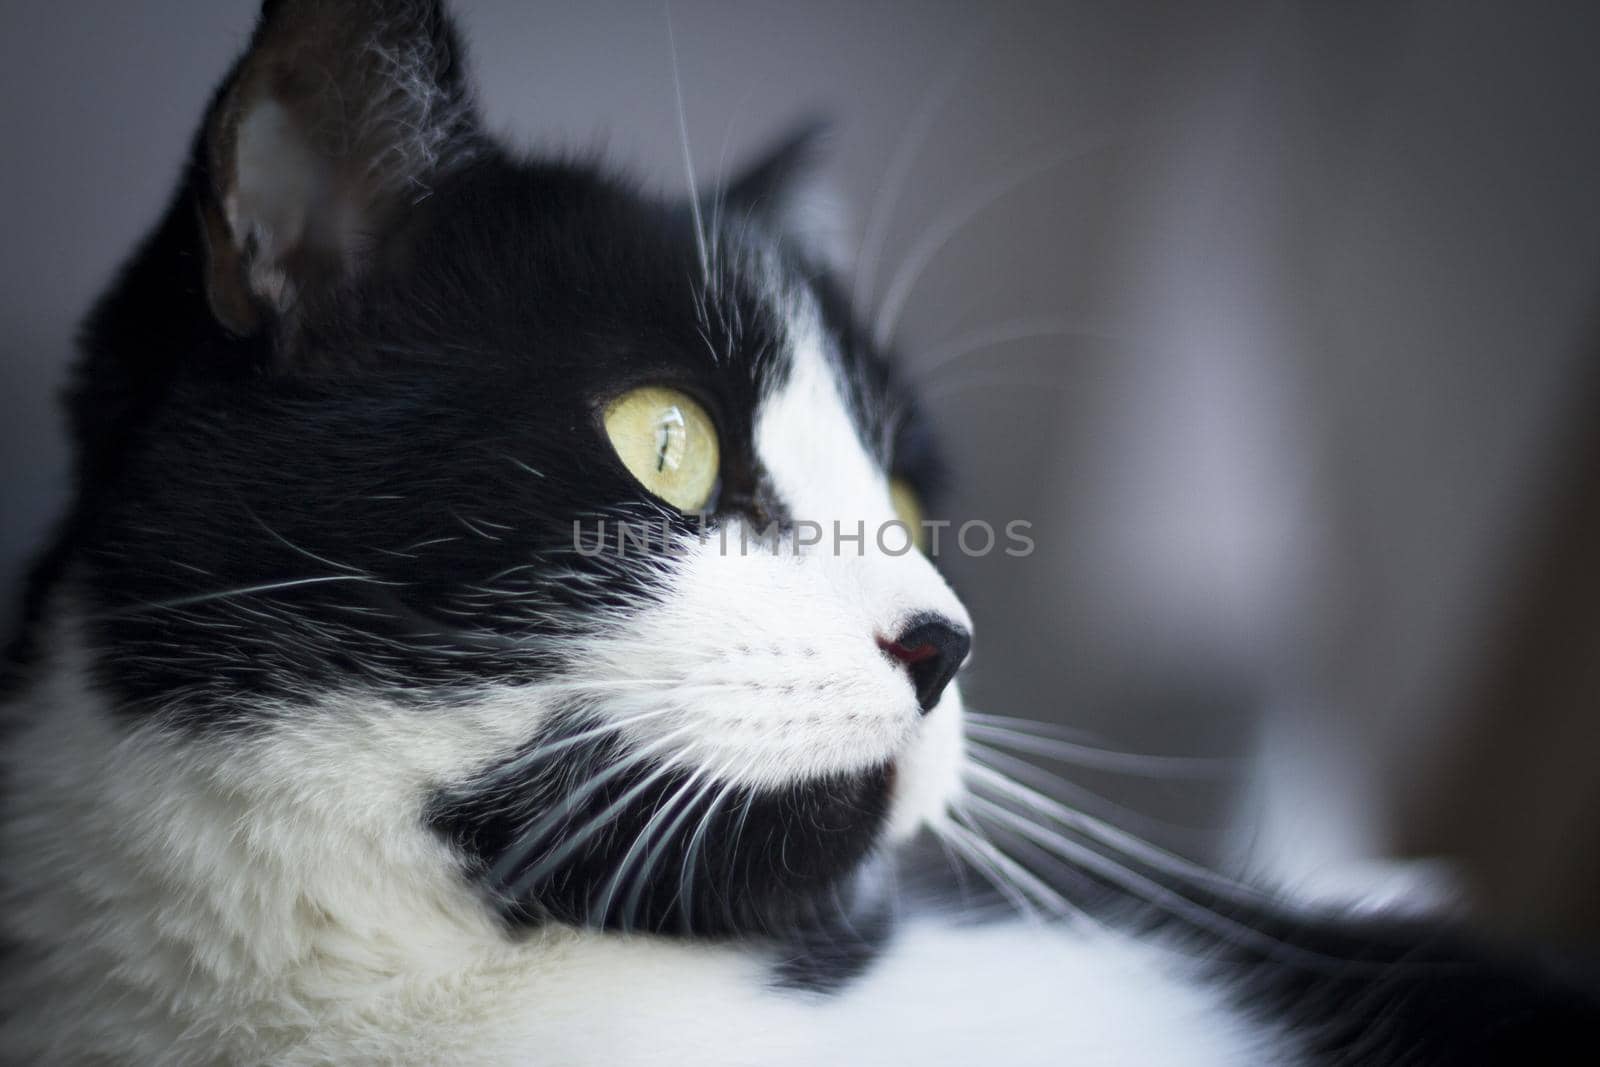 Immunodeficient black and white cat portrait. Relaxing